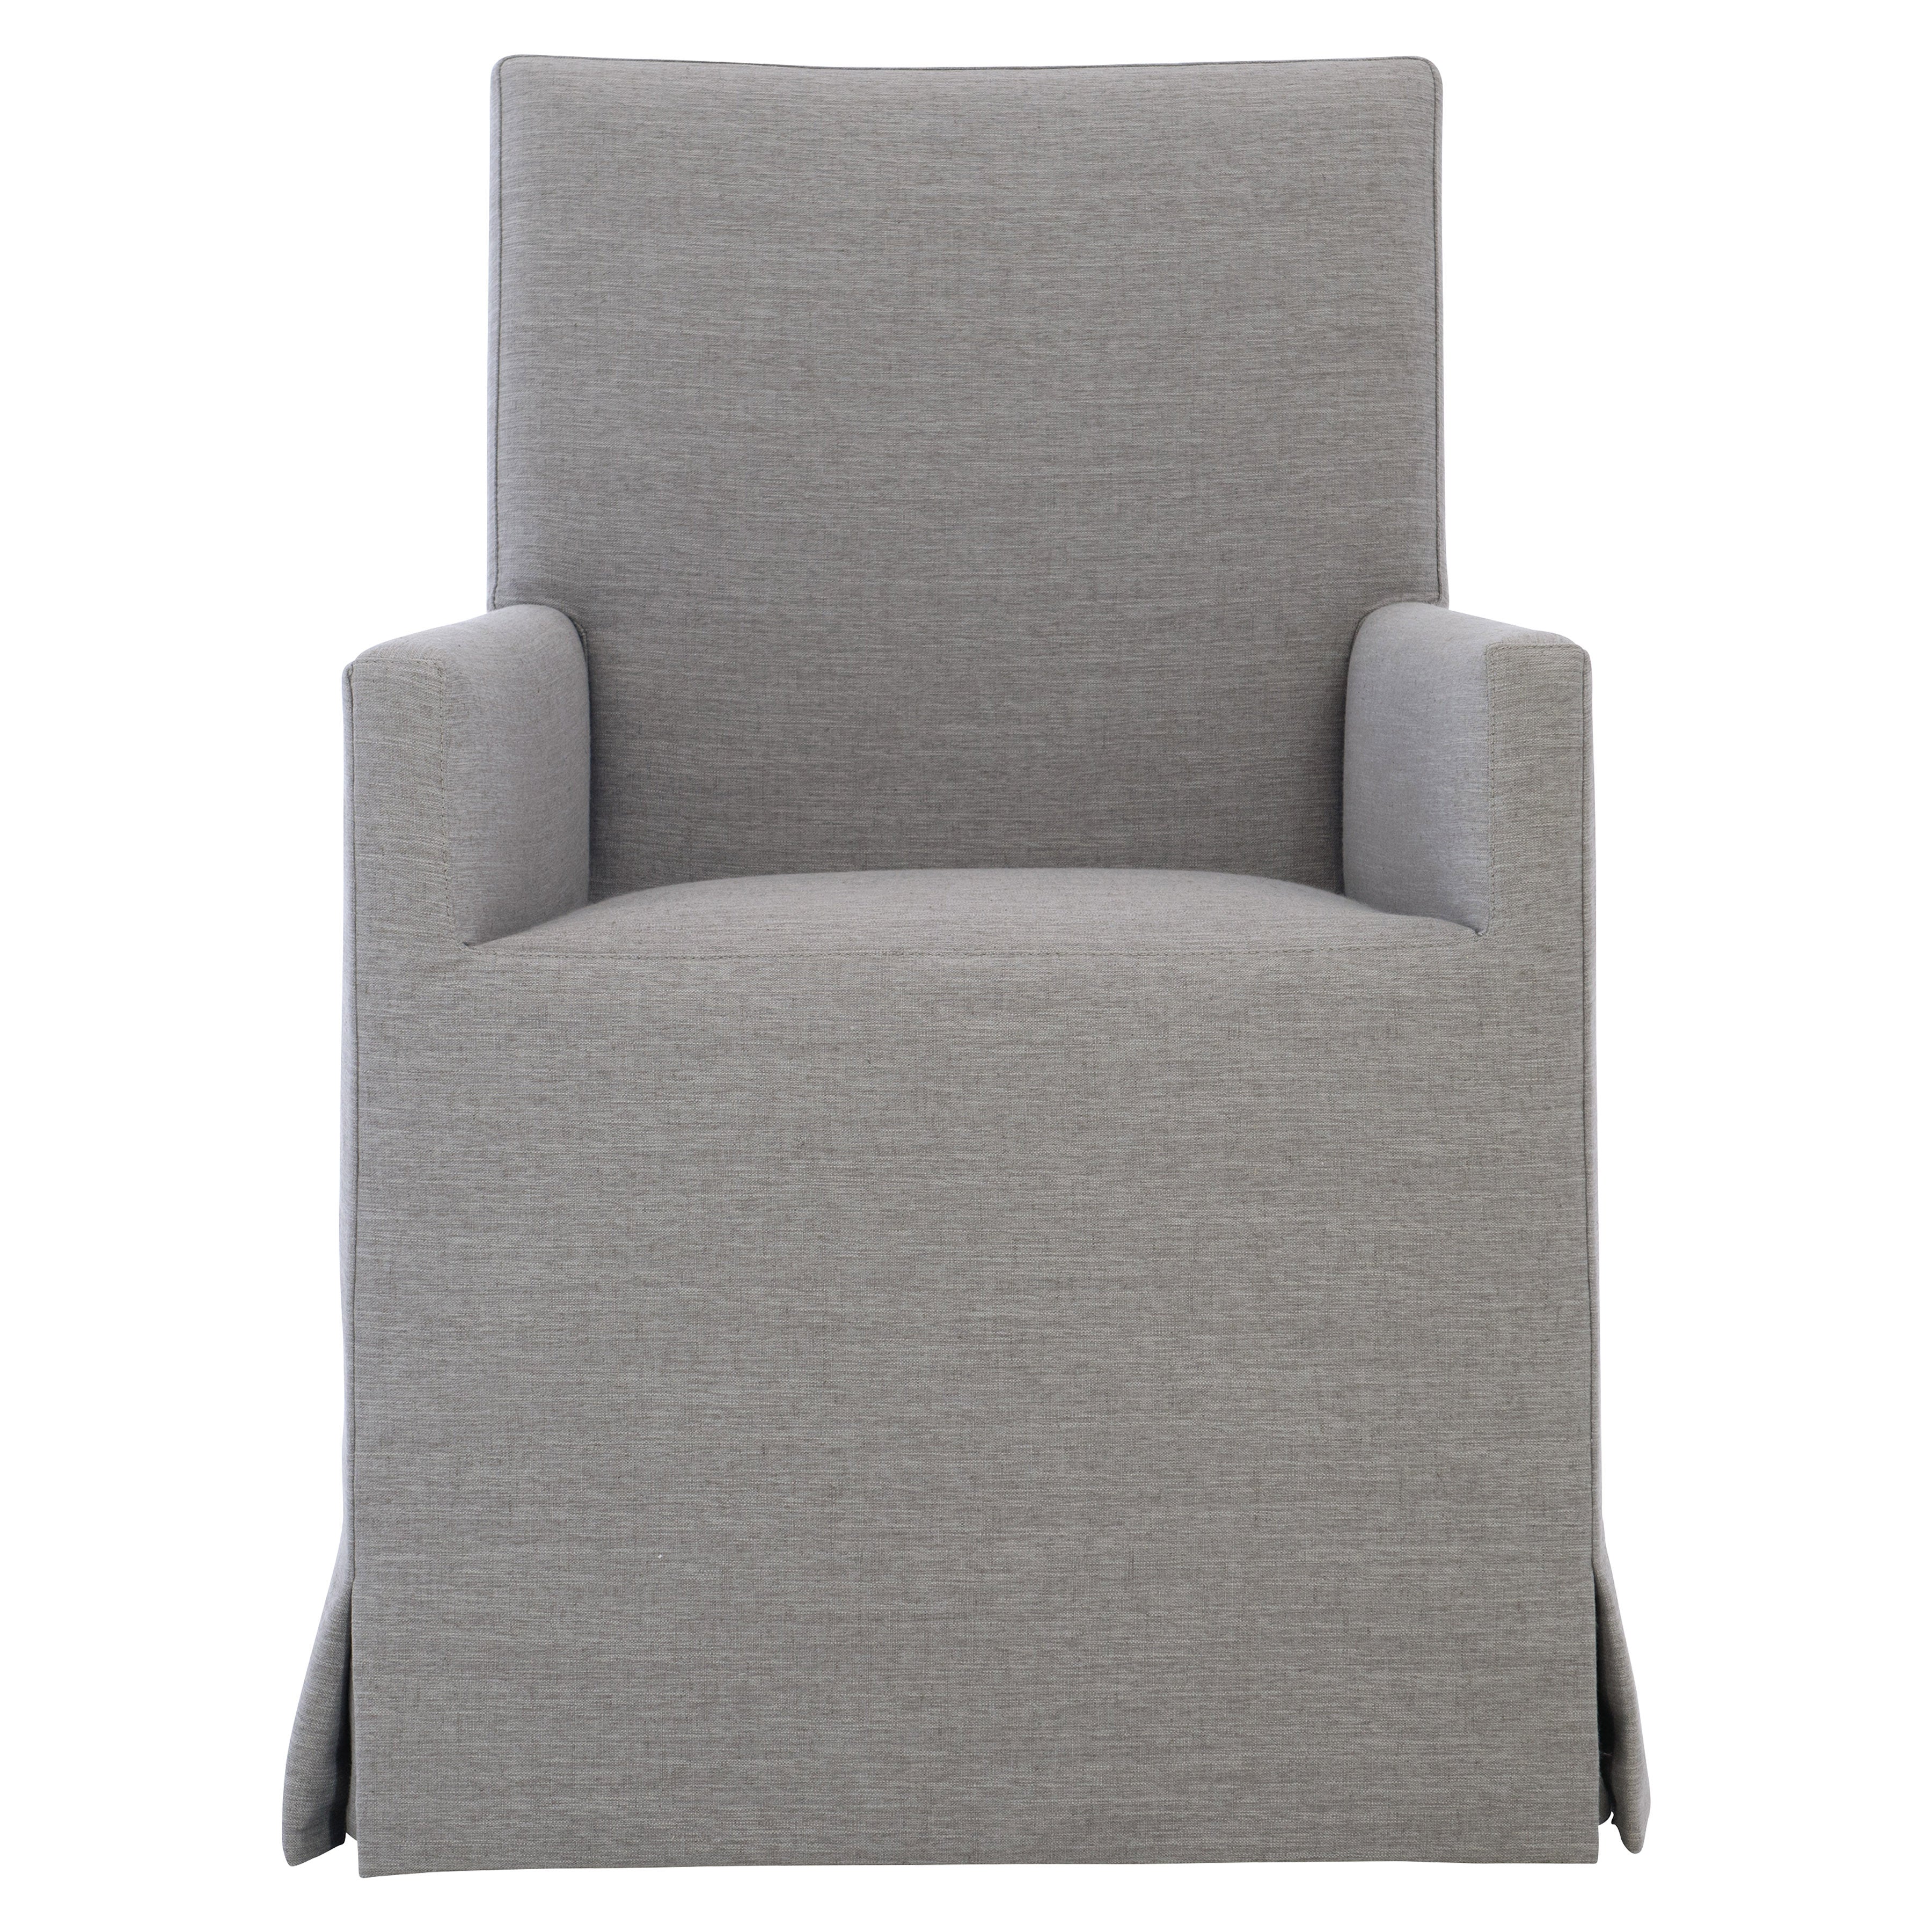 Mirabelle Fully Upholstered Arm Chair